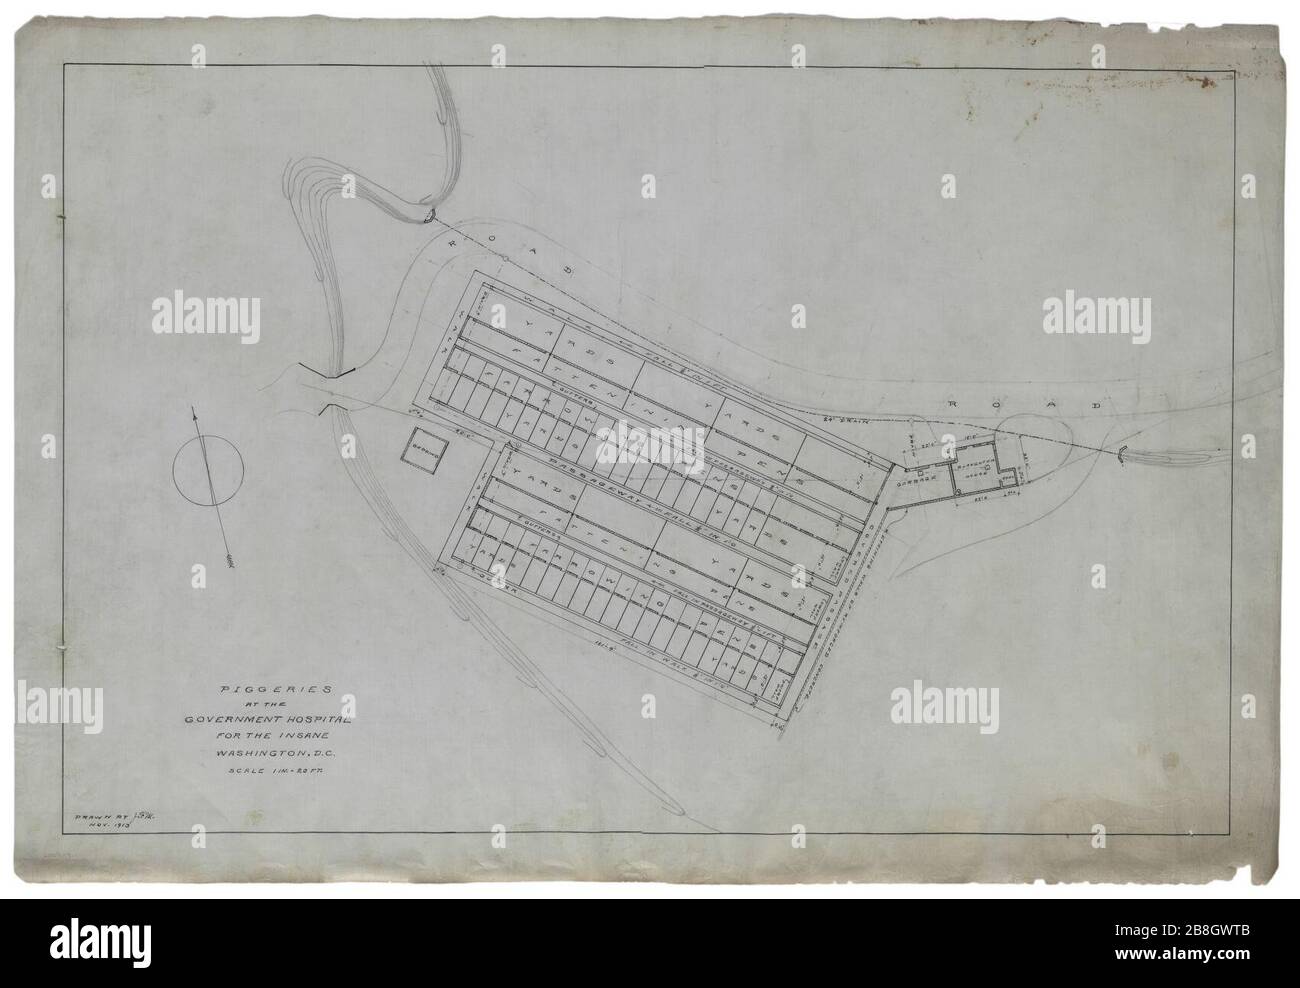 Government Hospital for the Insane (Saint Elizabeths Hospital), Washington, D.C. Piggeries. Plan and site plan with topographical additions) - J.F.M Stock Photo